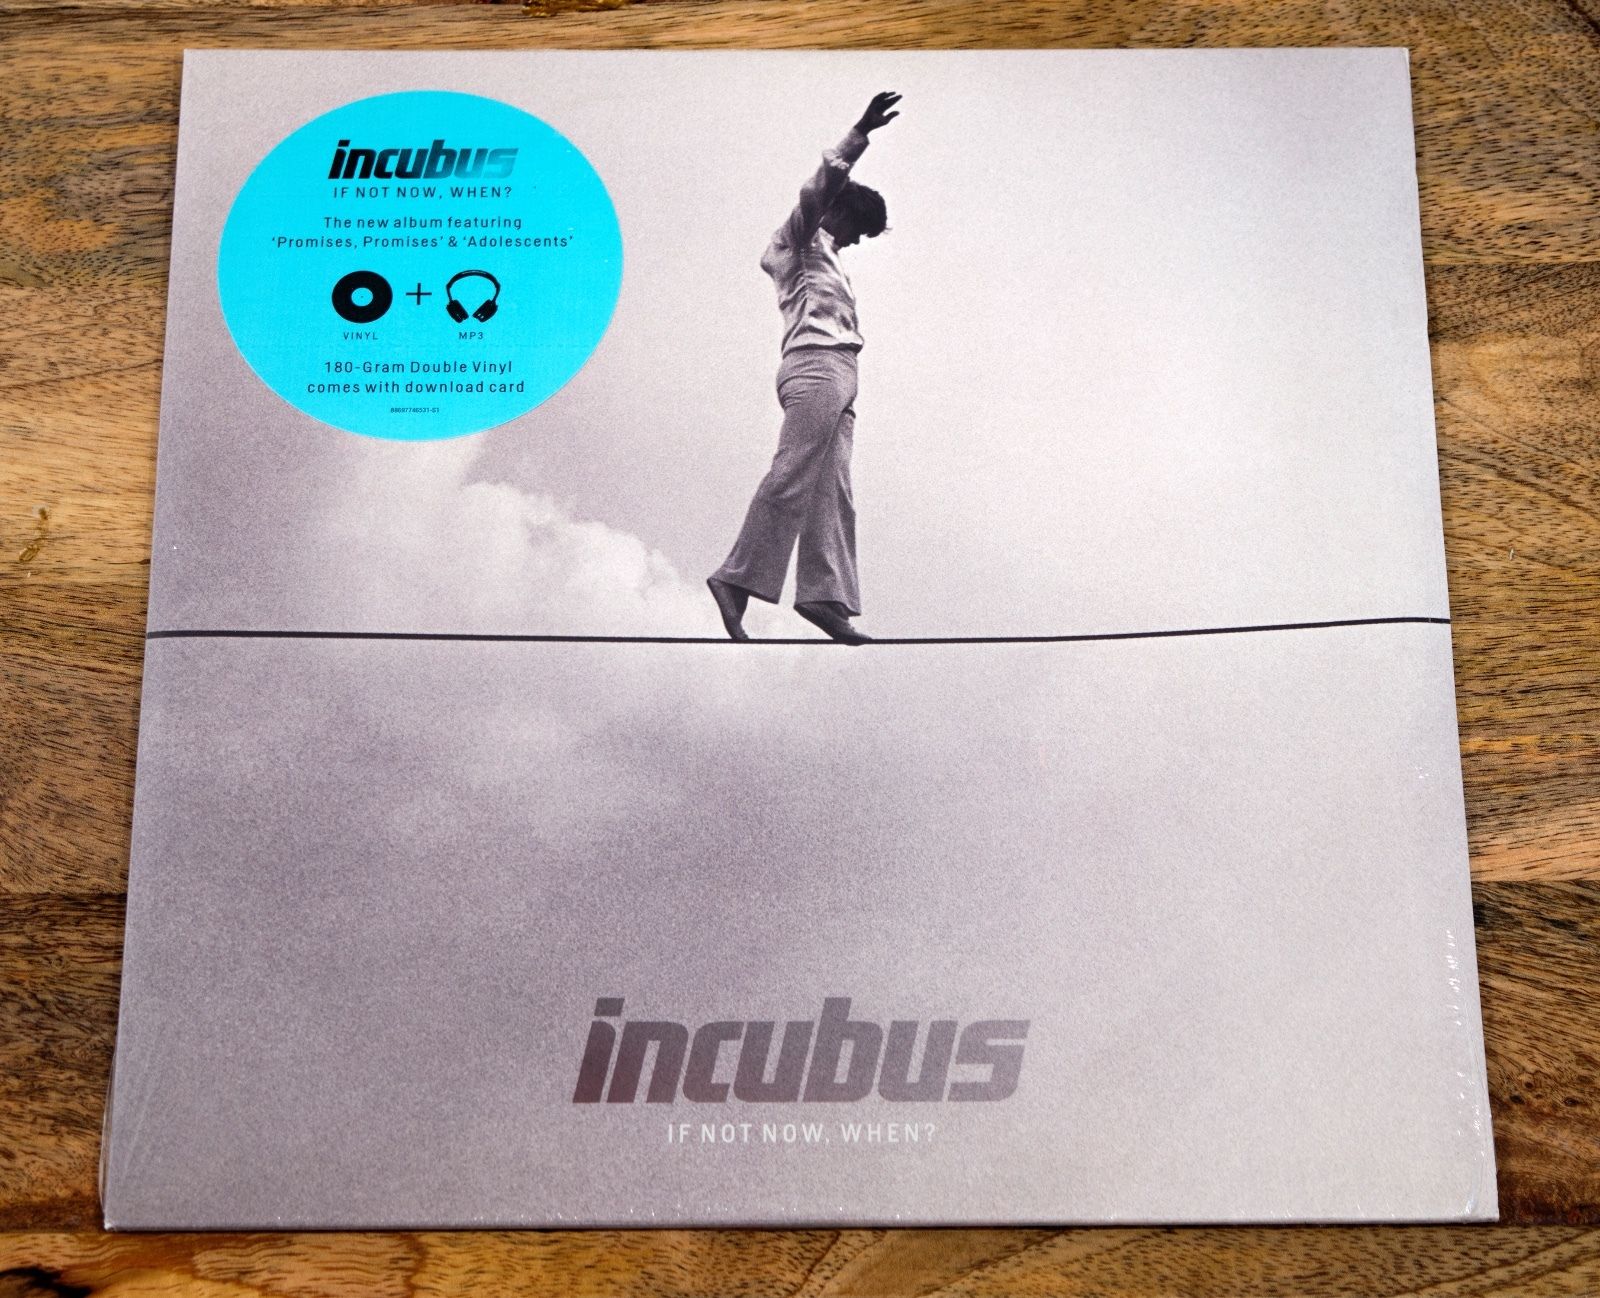 if not now when incubus album